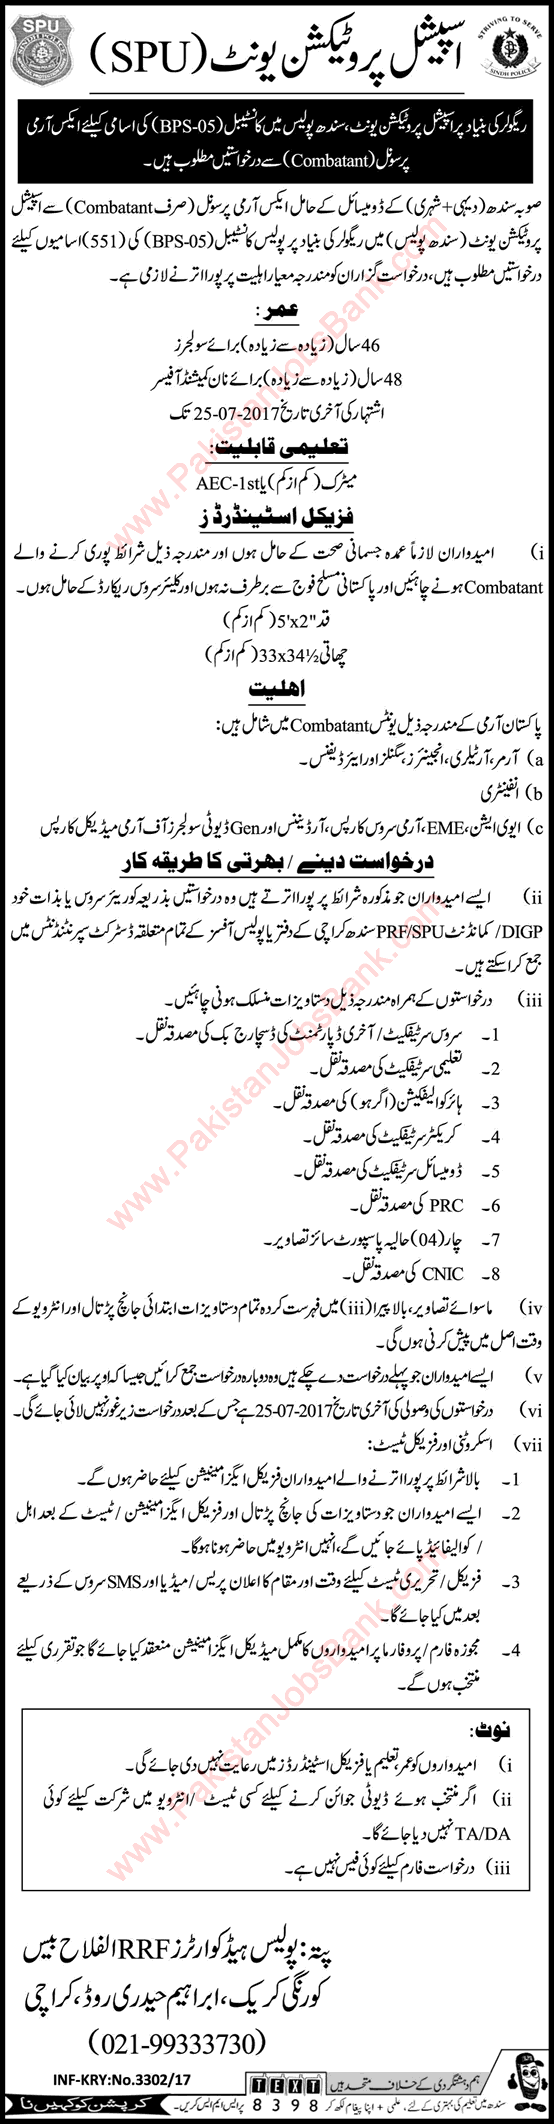 Sindh Police Constable Jobs July 2017 in Special Protection Unit SPU Ex/Retired Army Personnel Combatants Latest